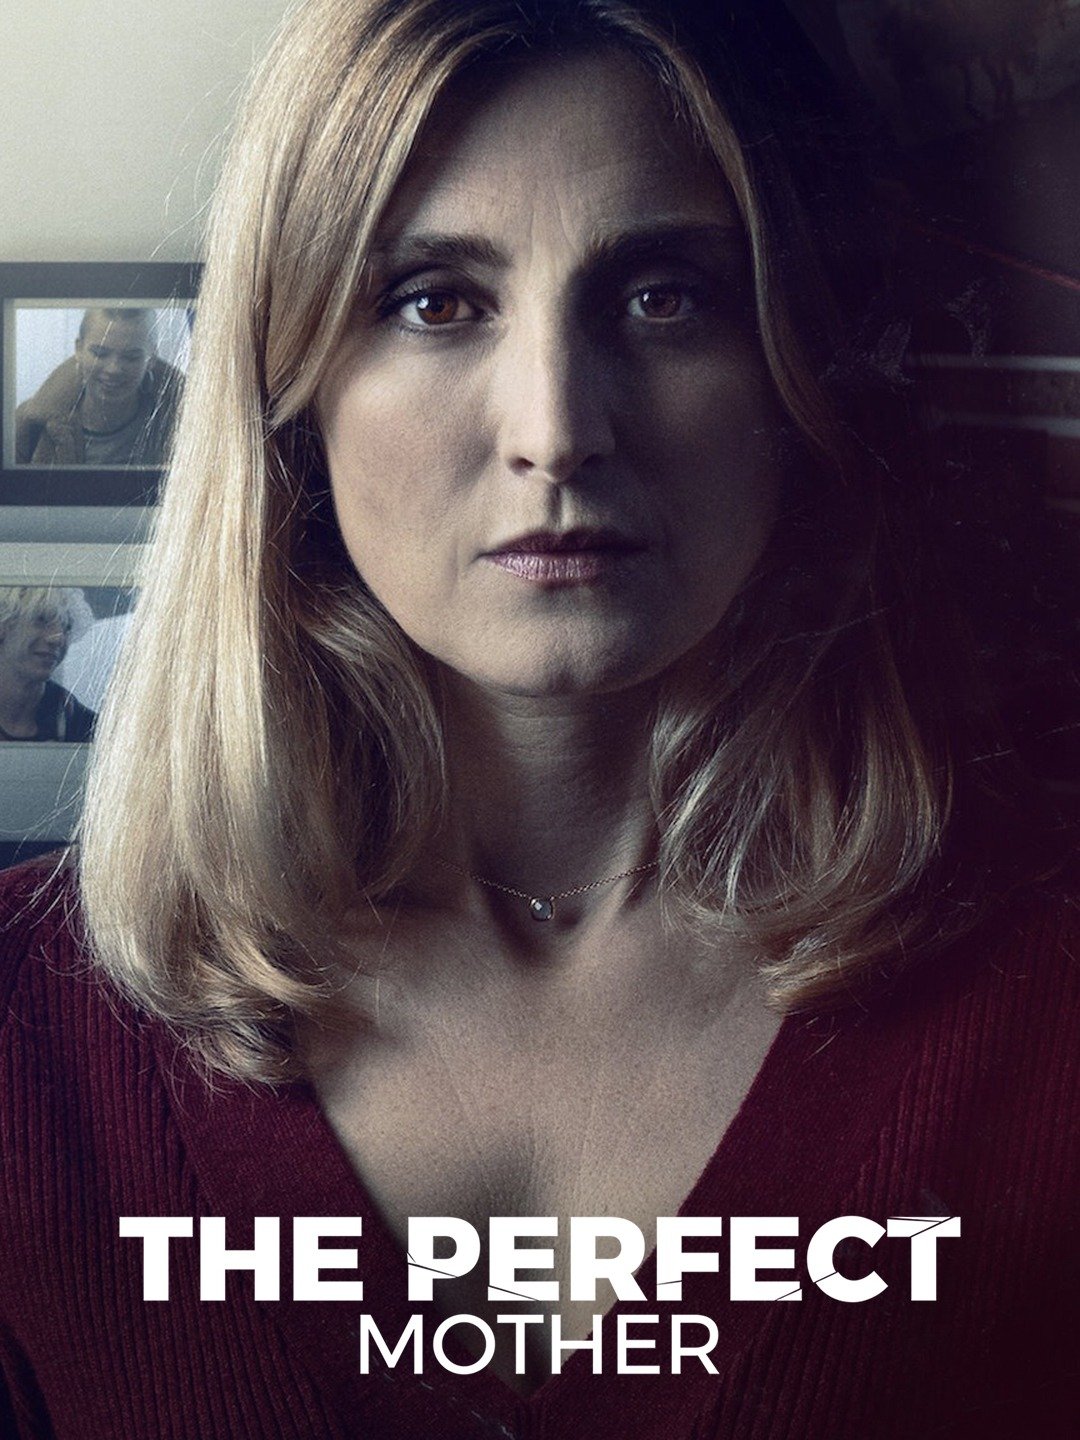 the perfect mother movie review